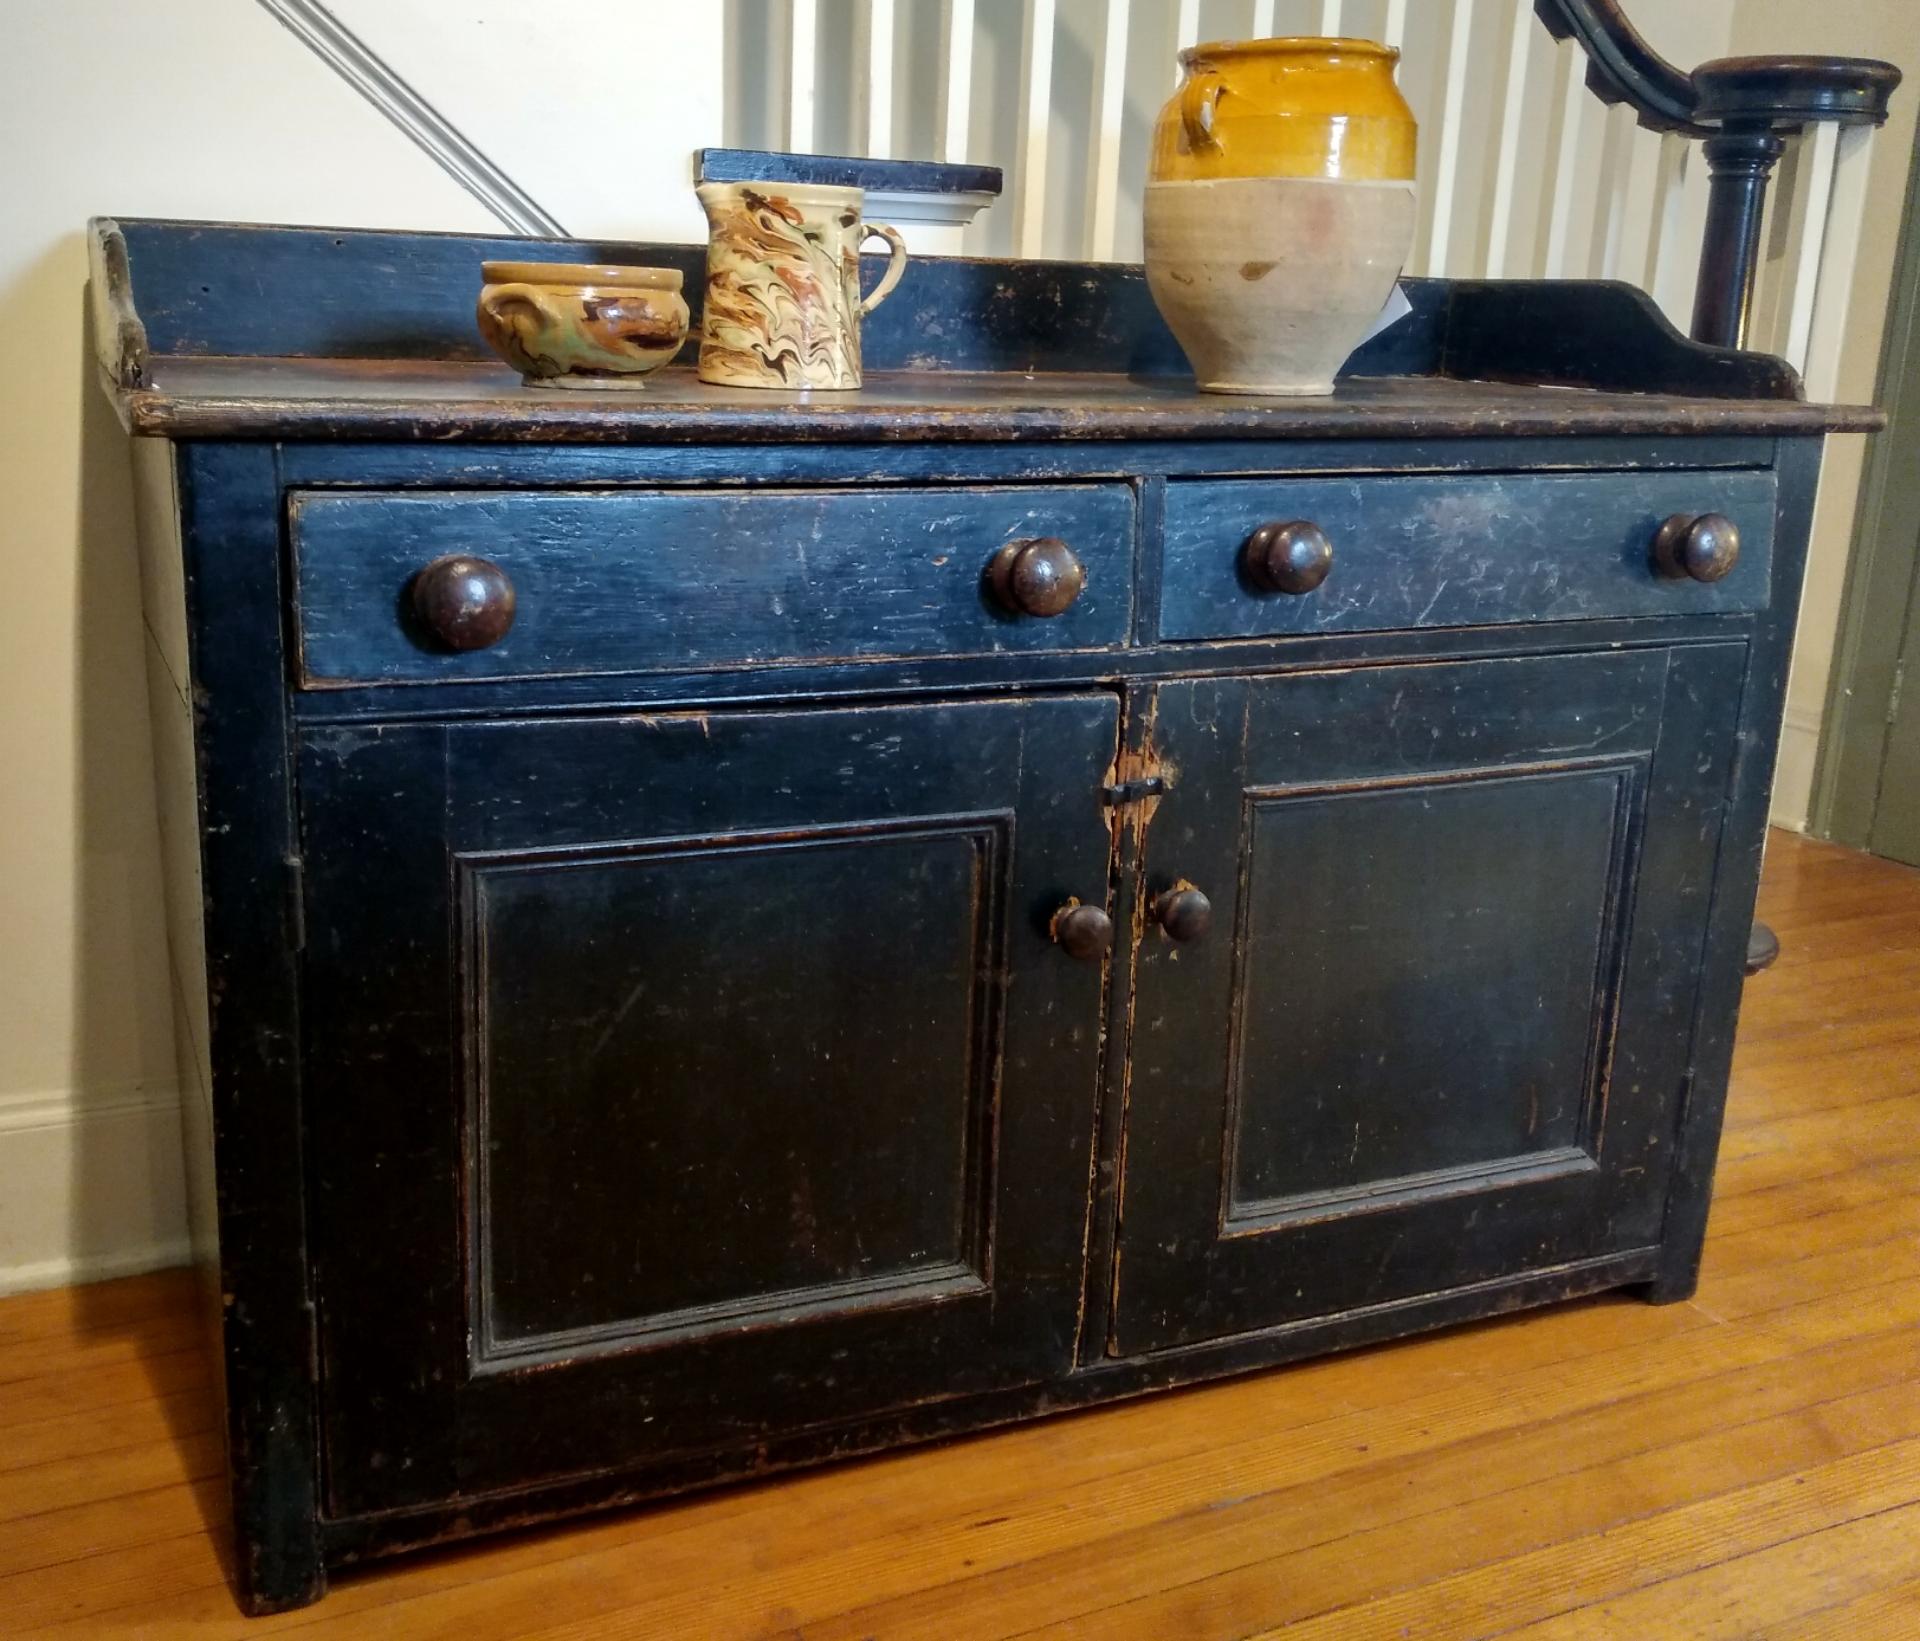 Original worn black paint and more worn tabletop, with original wooden knobs and a recessed shelf inside make this piece just about perfect. We love, love this two-door English buffet and the railing simple added to its unique look.
 